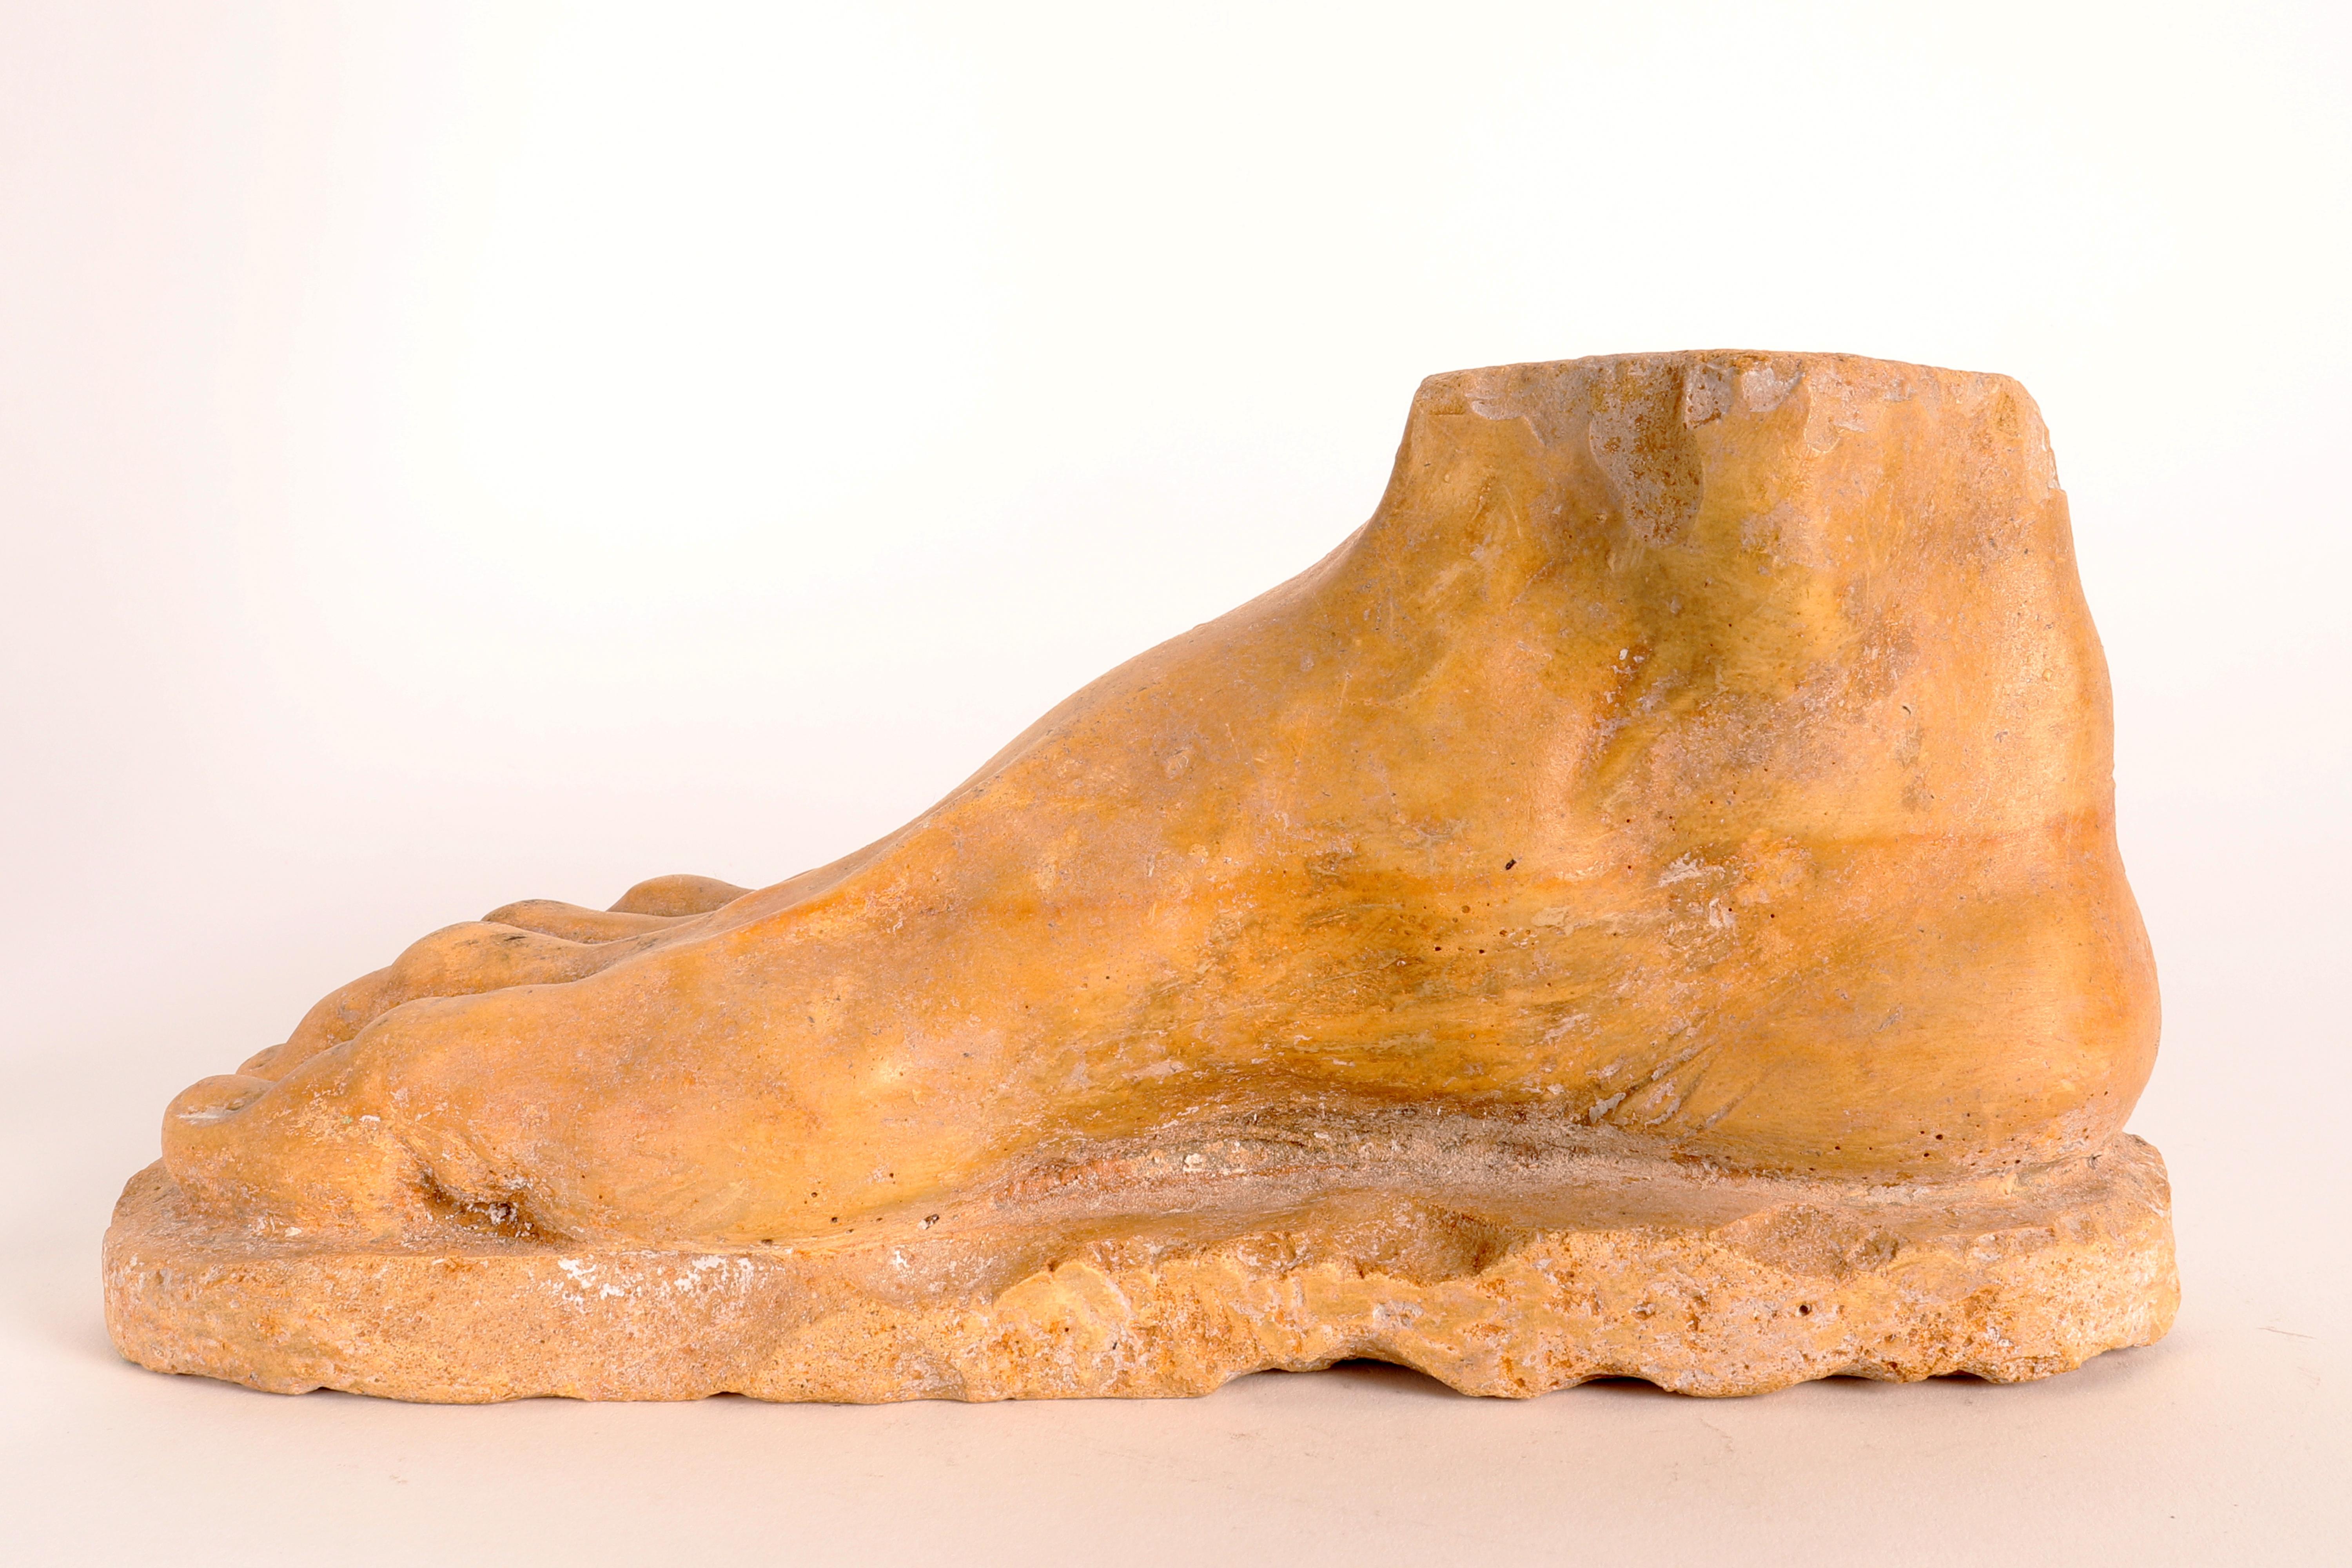 Sculpture of a foot in yellow Siena marble. The sculpture rests on a hinted ground. Replica of a classic type, the construction is excellent, from the proportions to the minimum attention to detail, such as the anatomy detectable under the skin. The